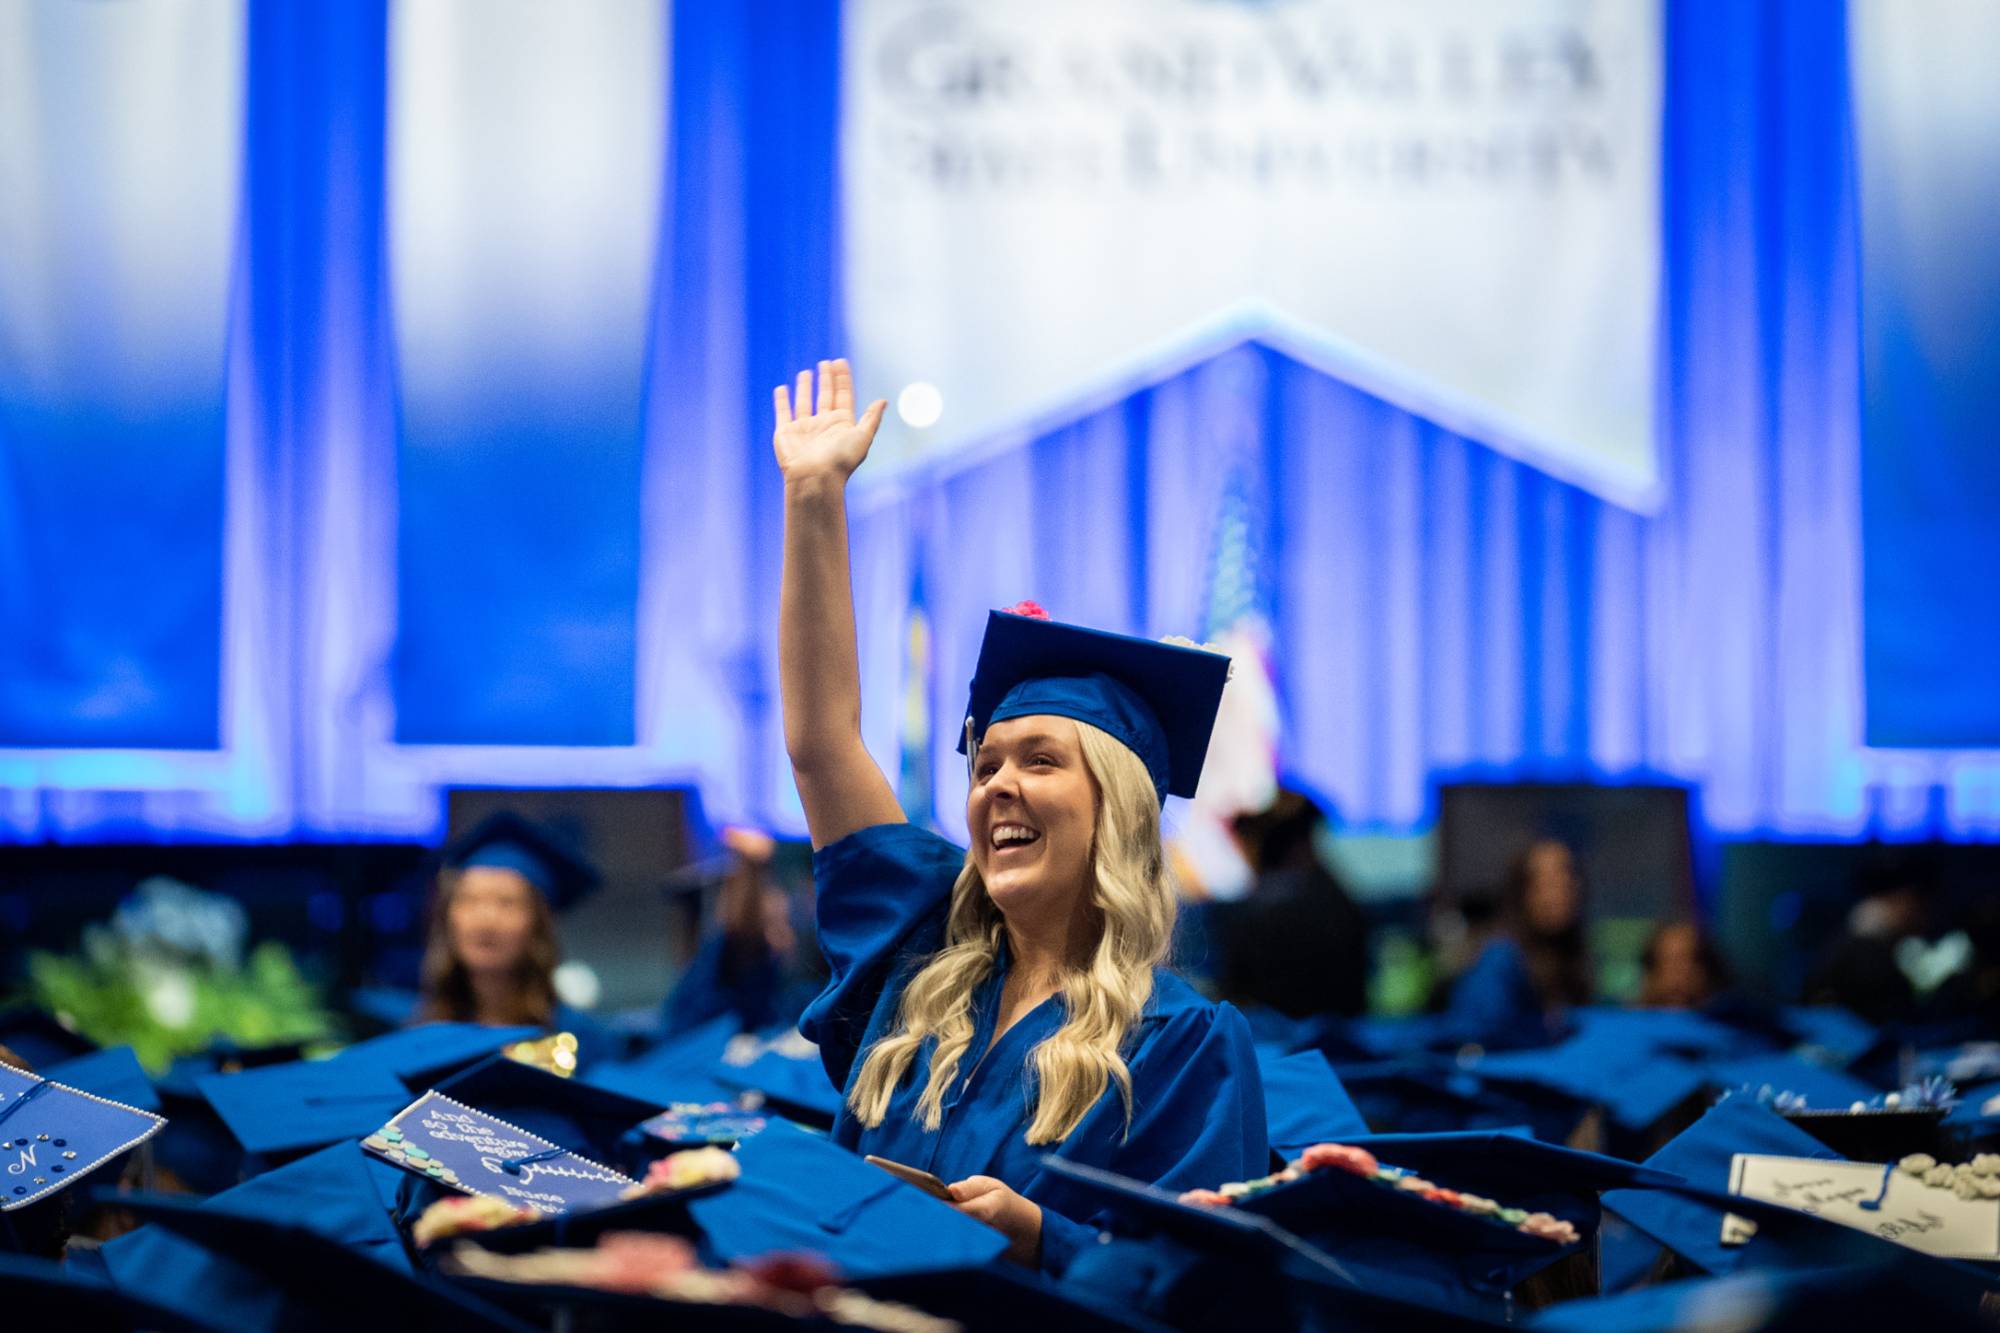 A grad raises her hand at commencement